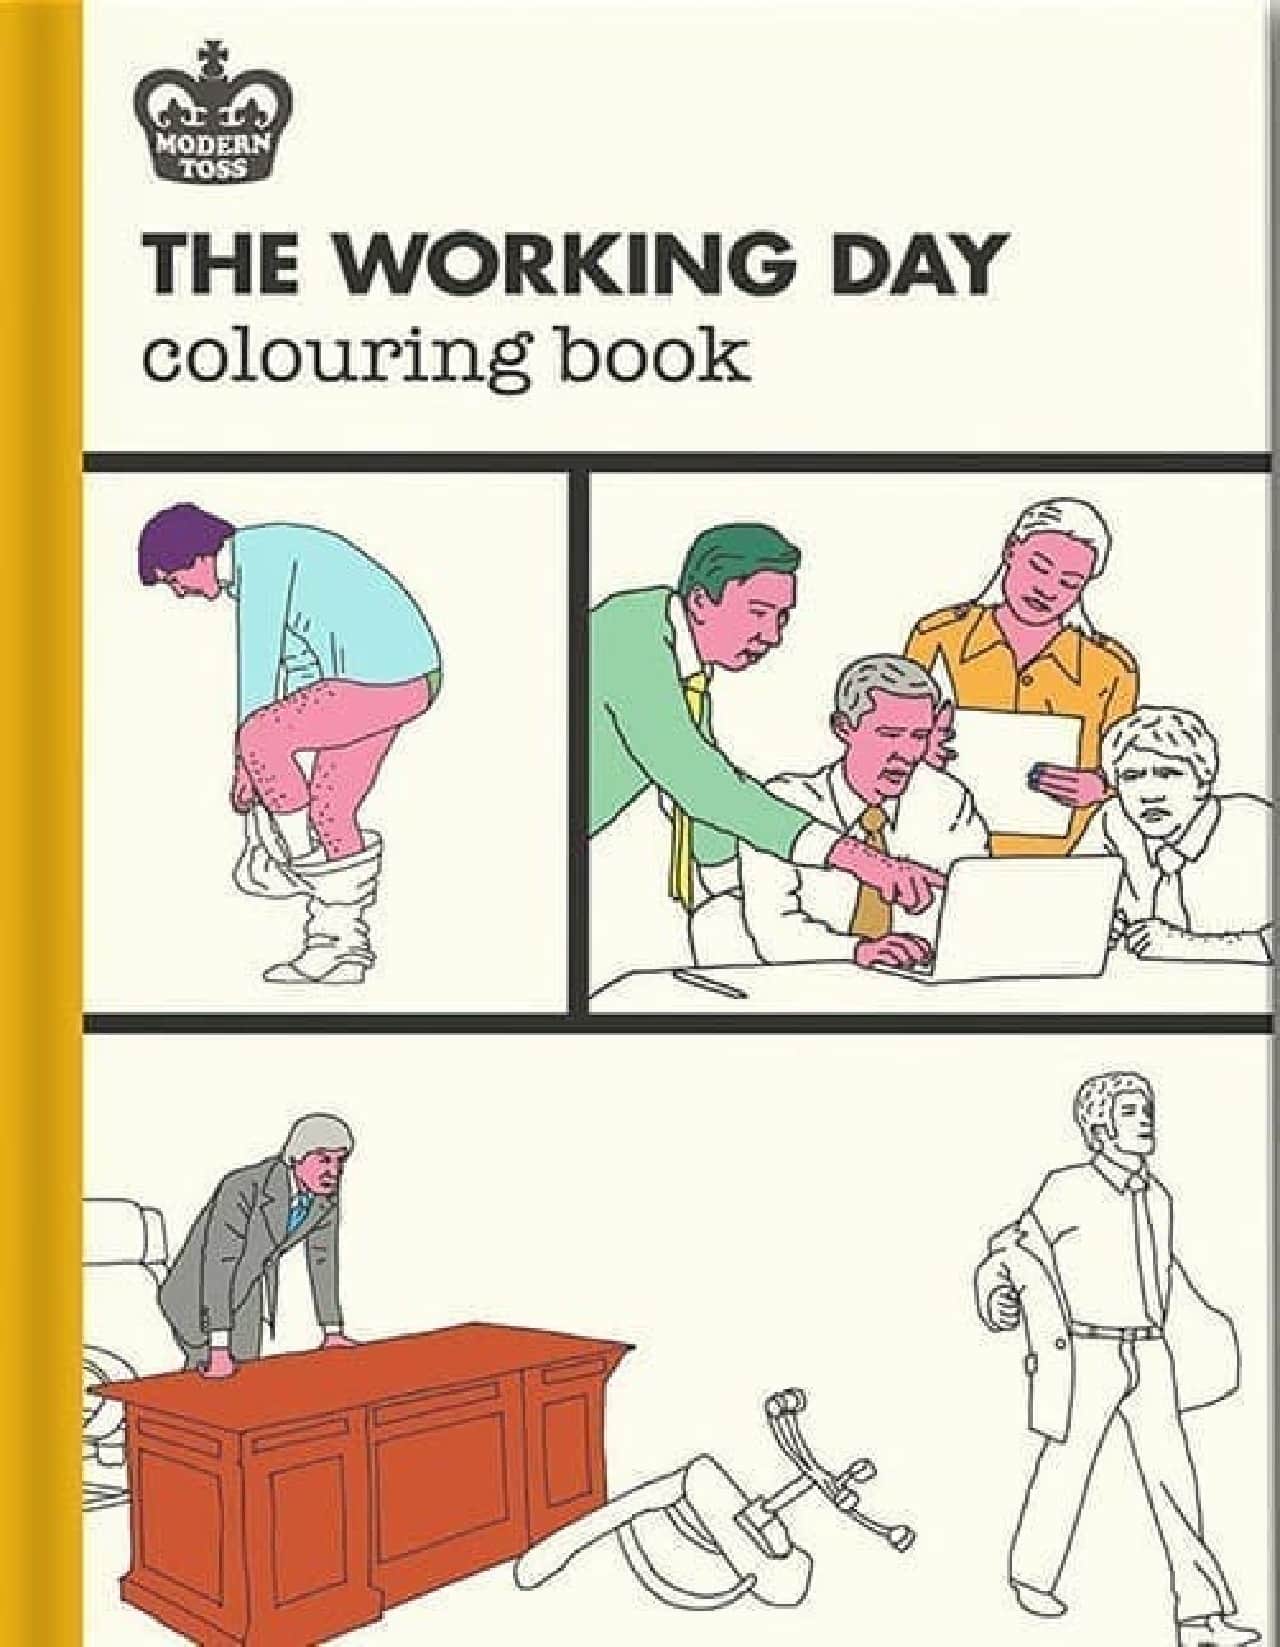 Coloring book "The Working Day"